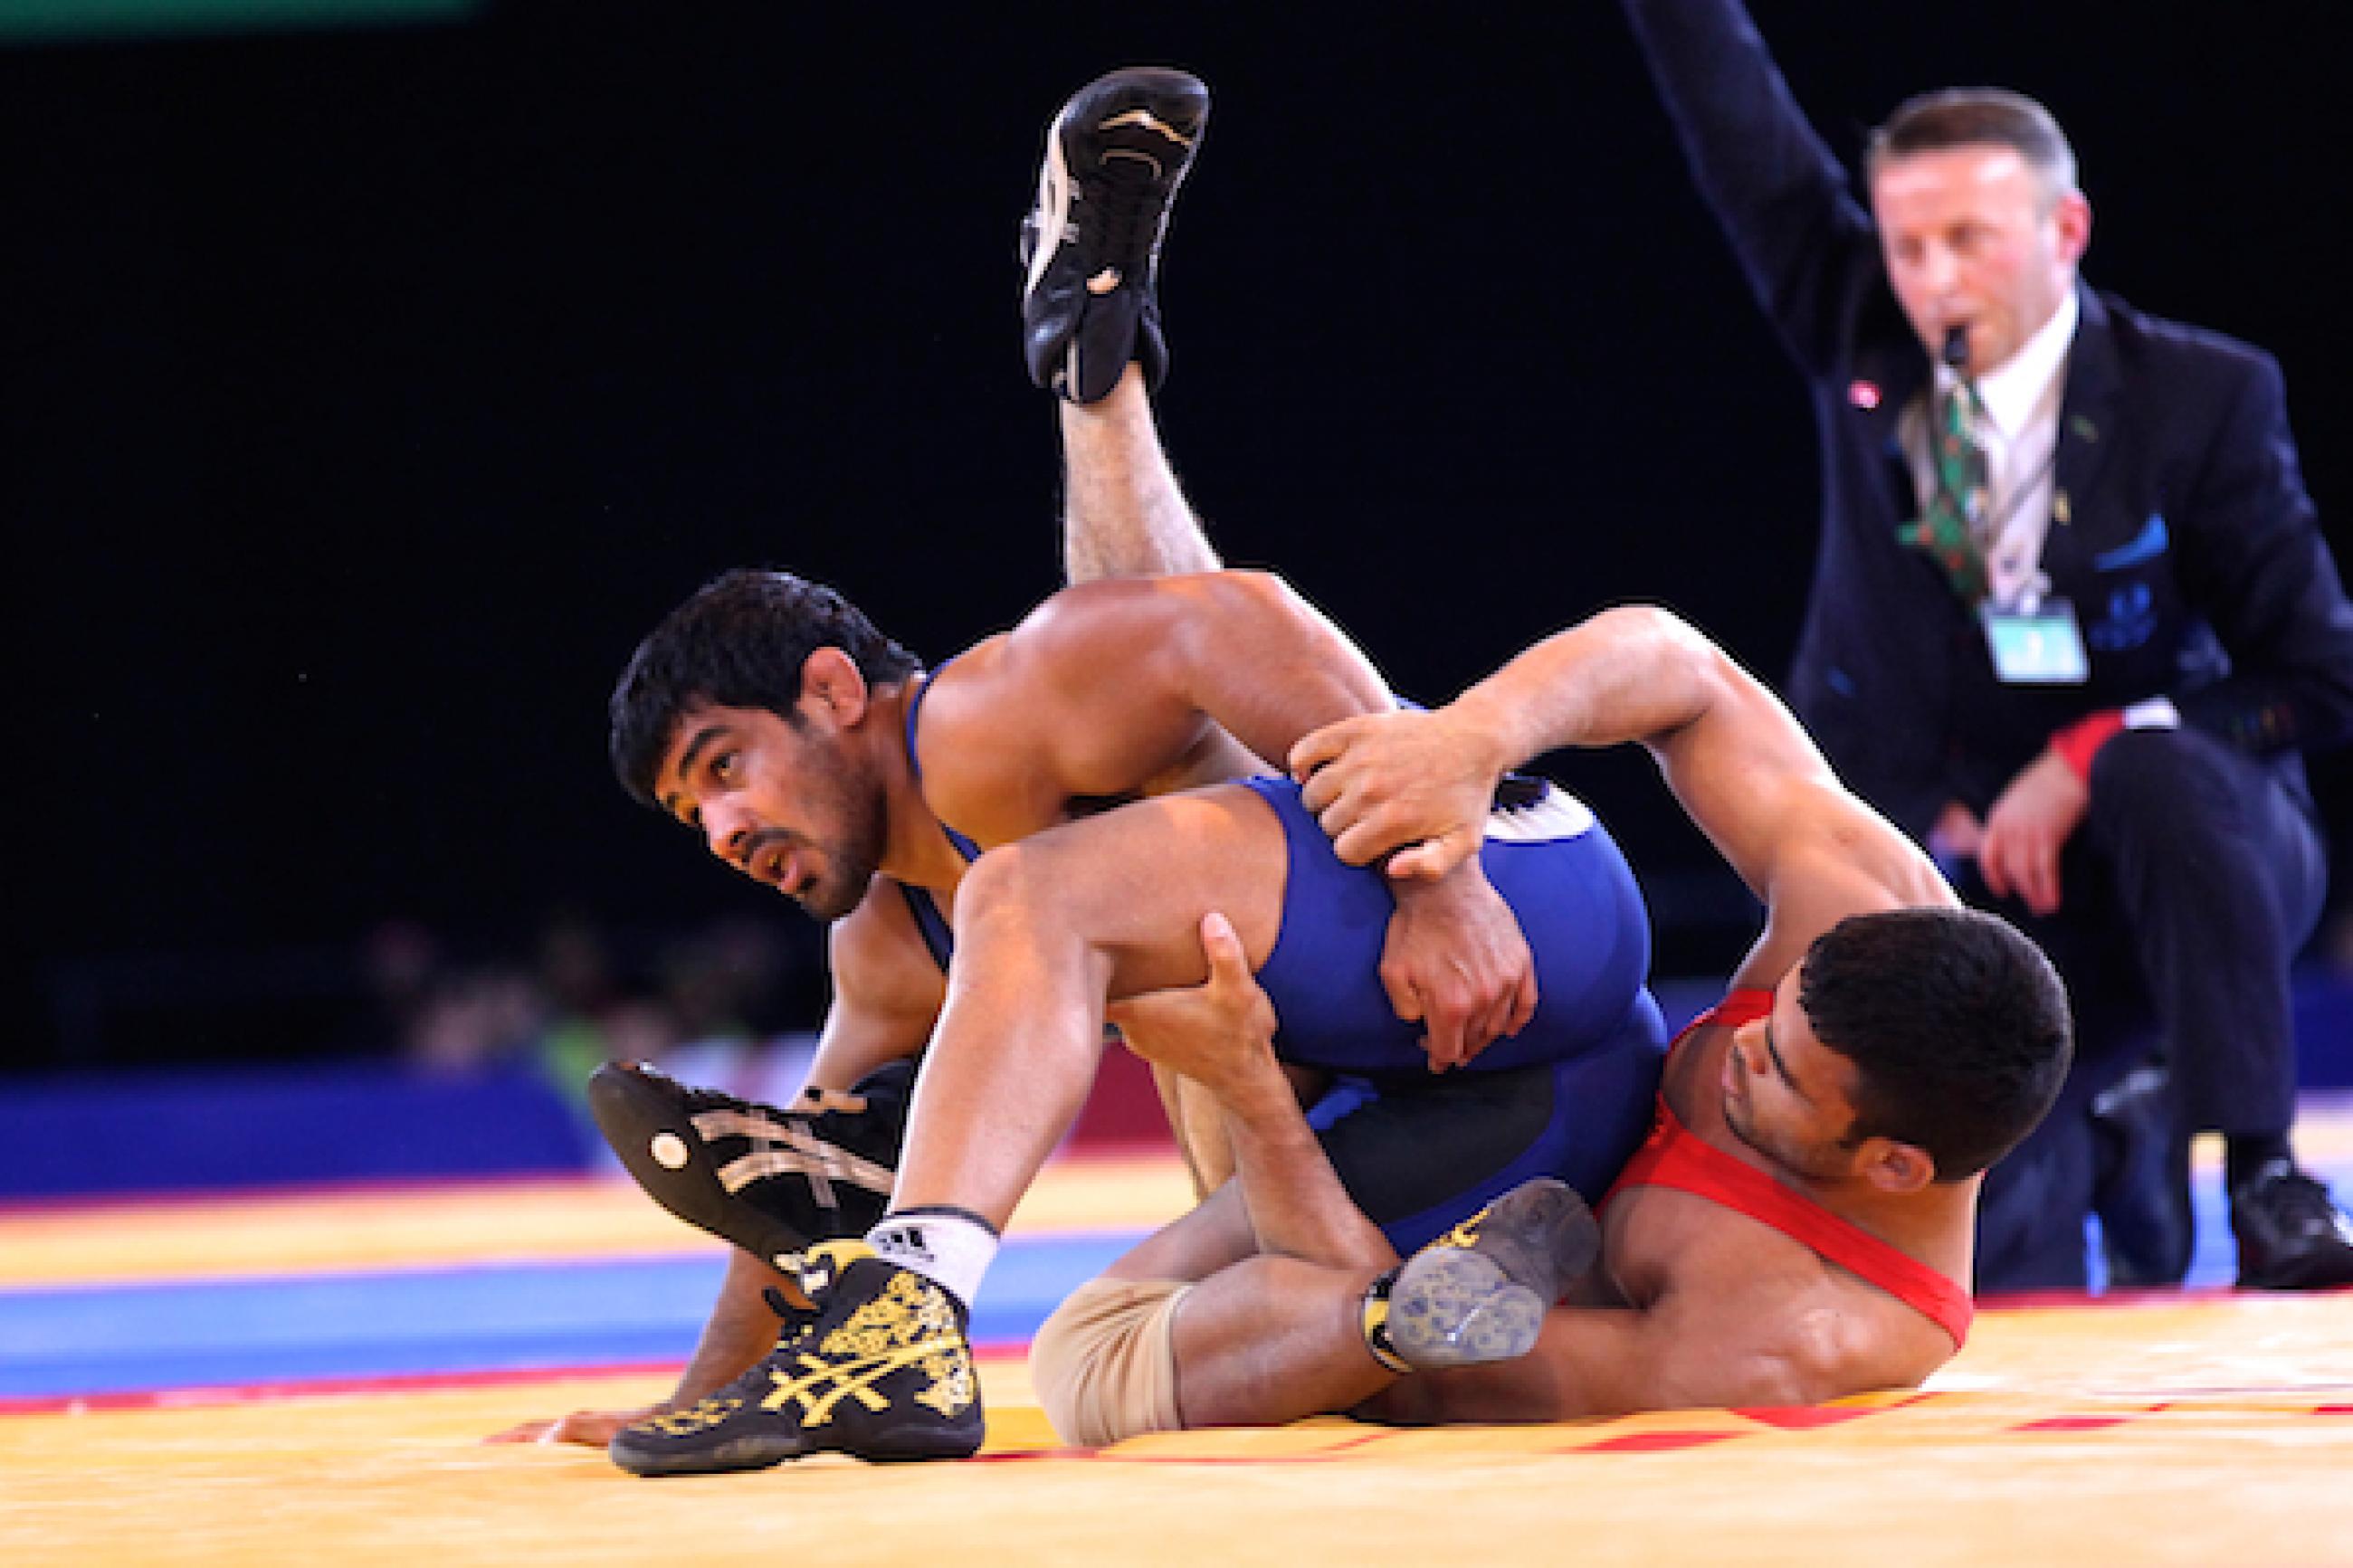 India Wins Three, Canada Two on Opening Day of Wrestling at